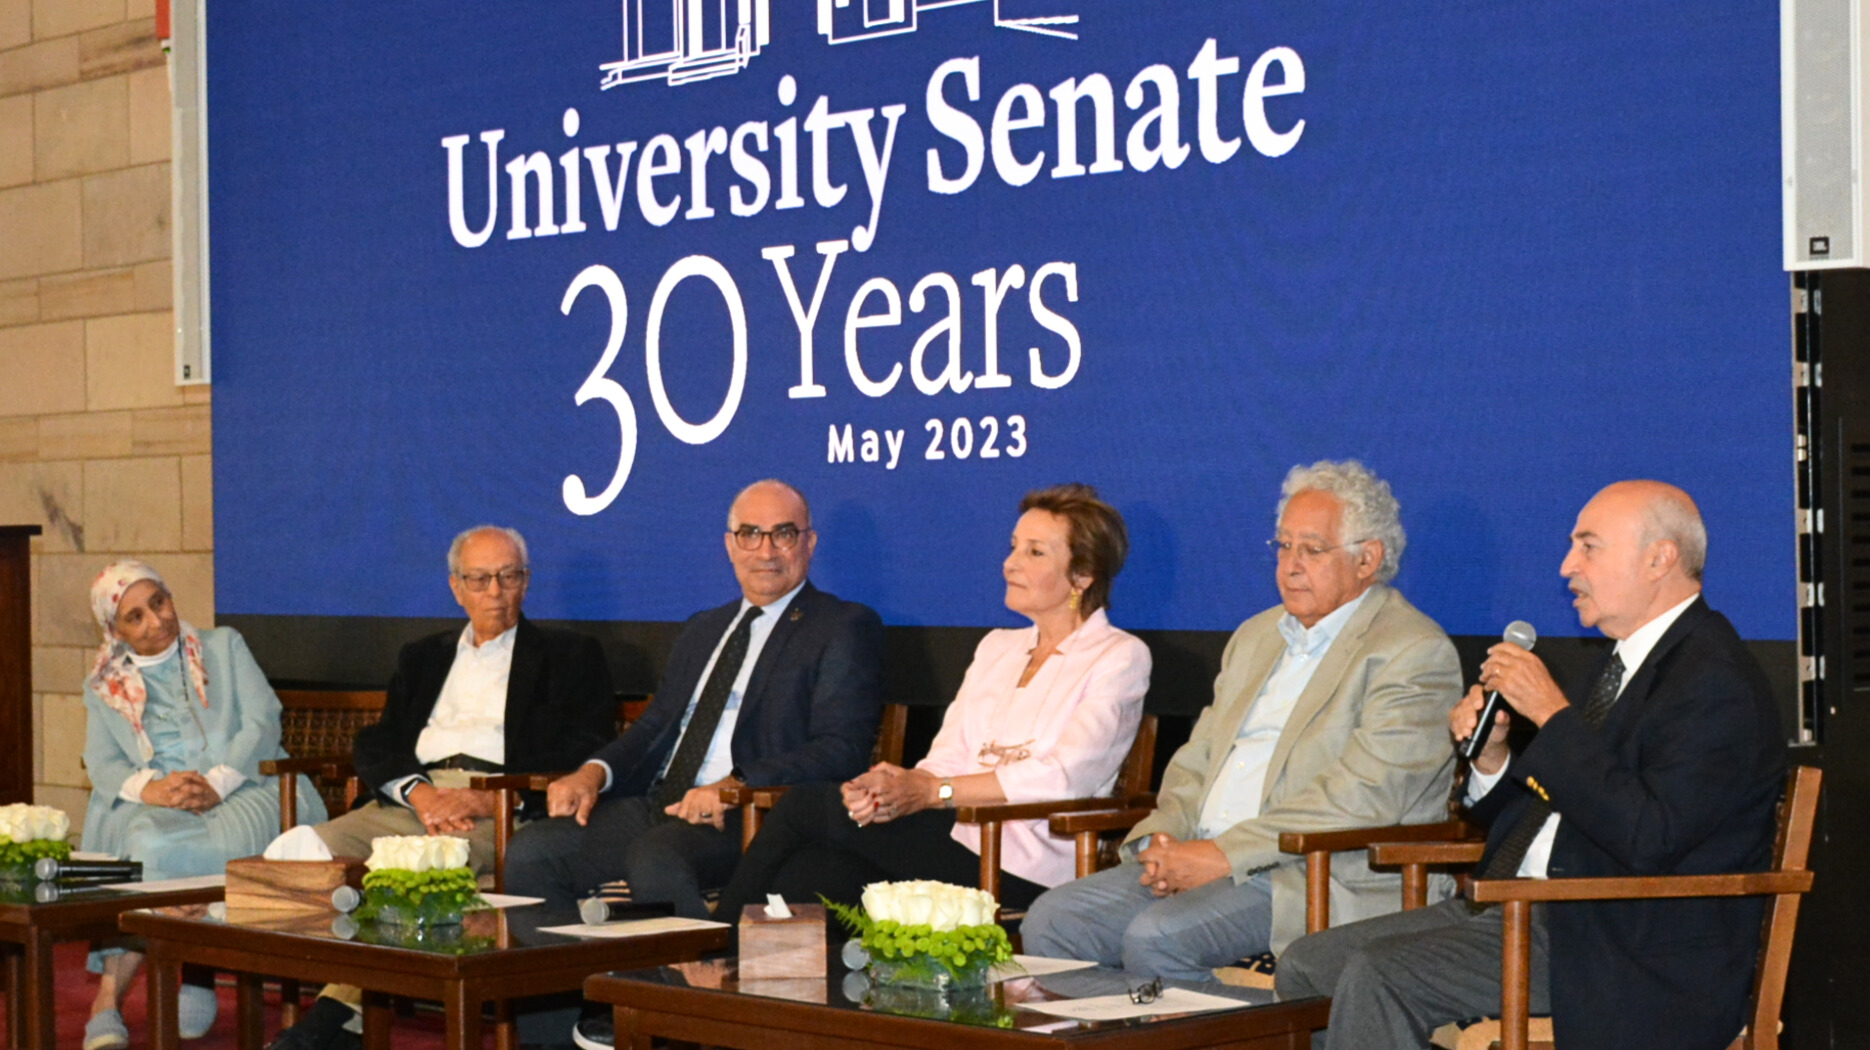 A panel discussion at the celebration ceremony